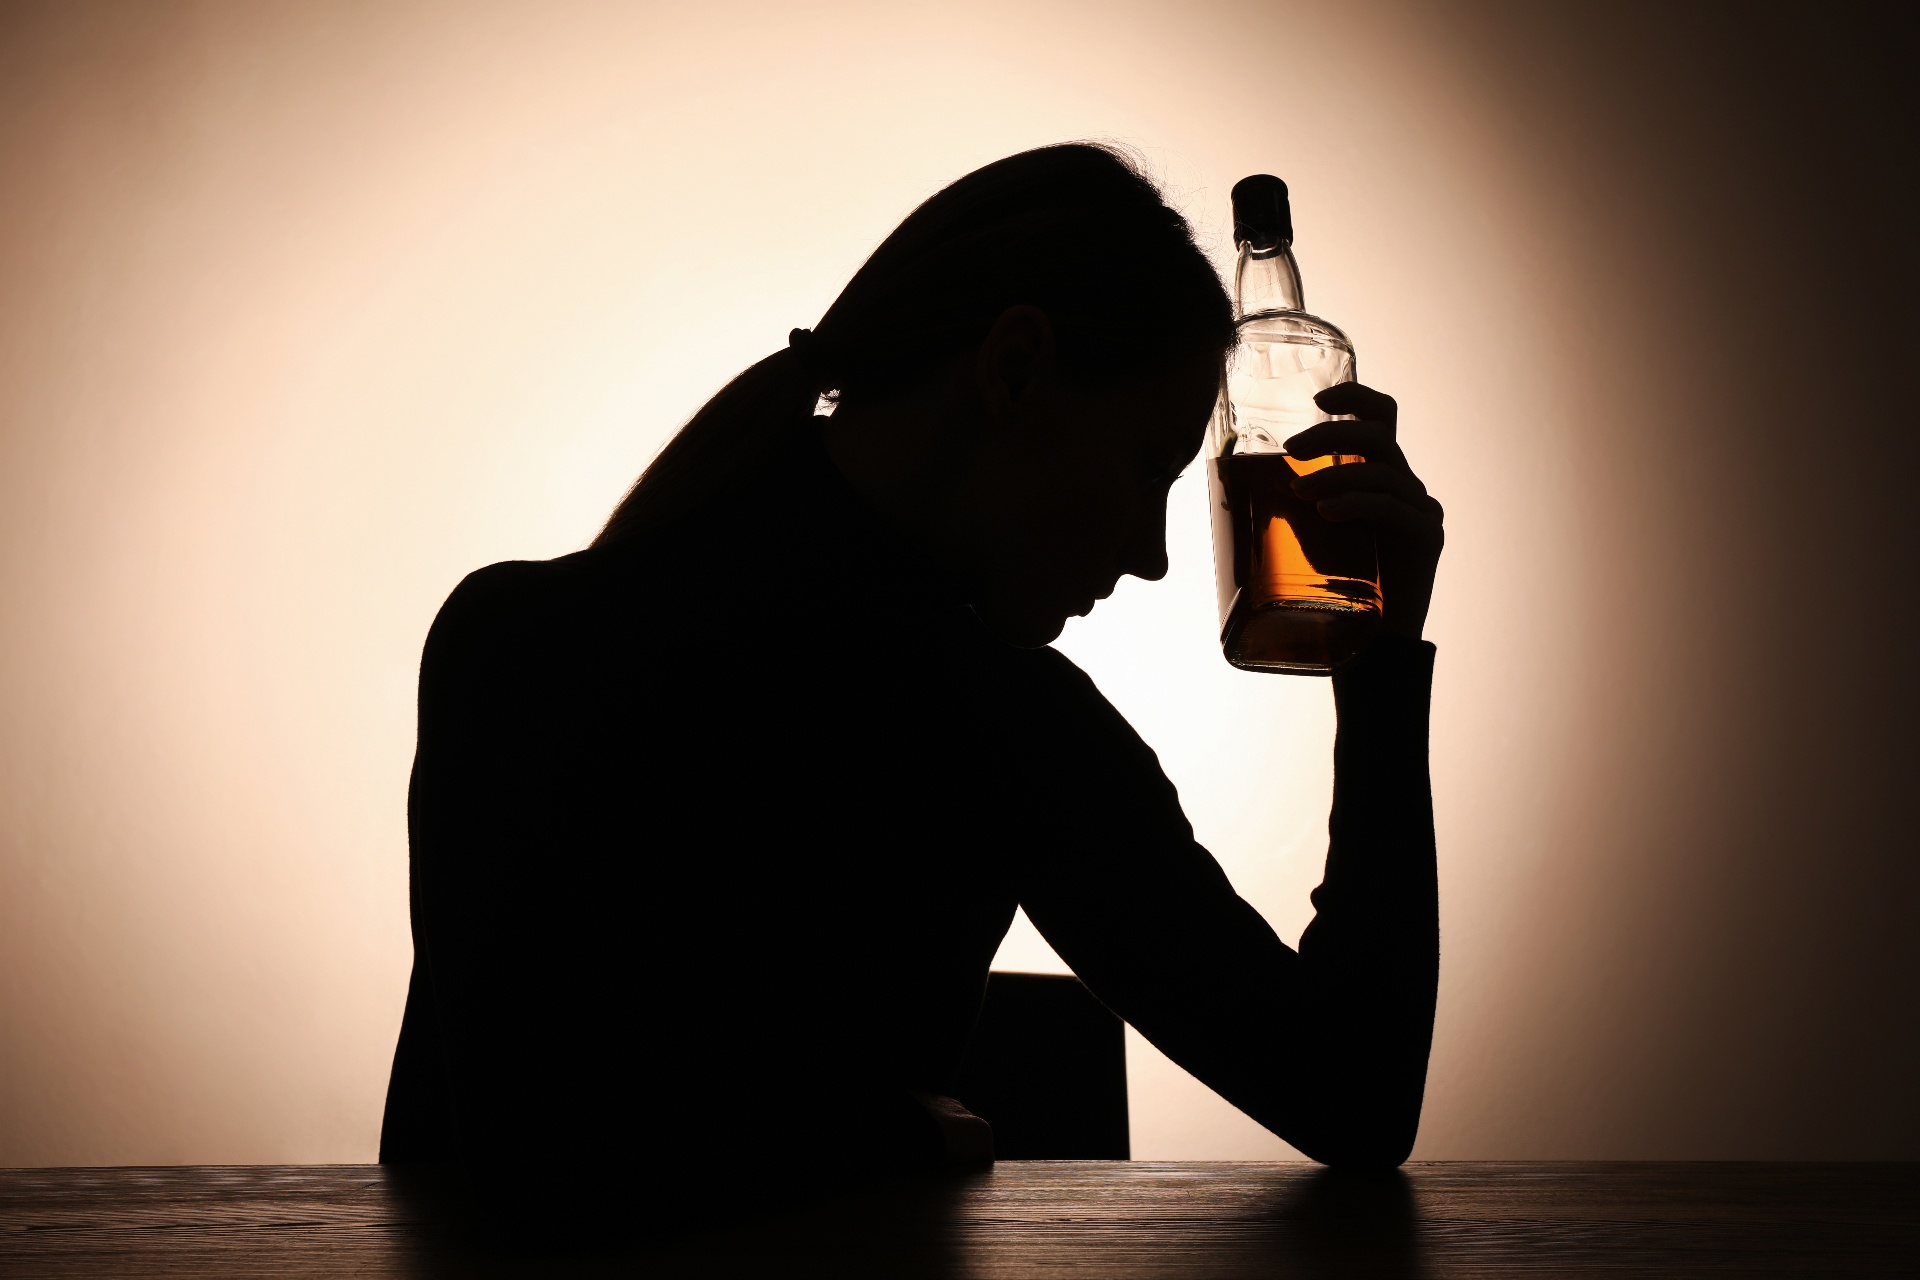 A silhouette of a woman holding an alcohol bottle against her head. A substance abuse counselor in Palm Beach, FL can offer support in overcoming substance use disorder symptoms in Palm Beach, FL. Learn more about substance abuse counseling in Delray Beach, FL today.